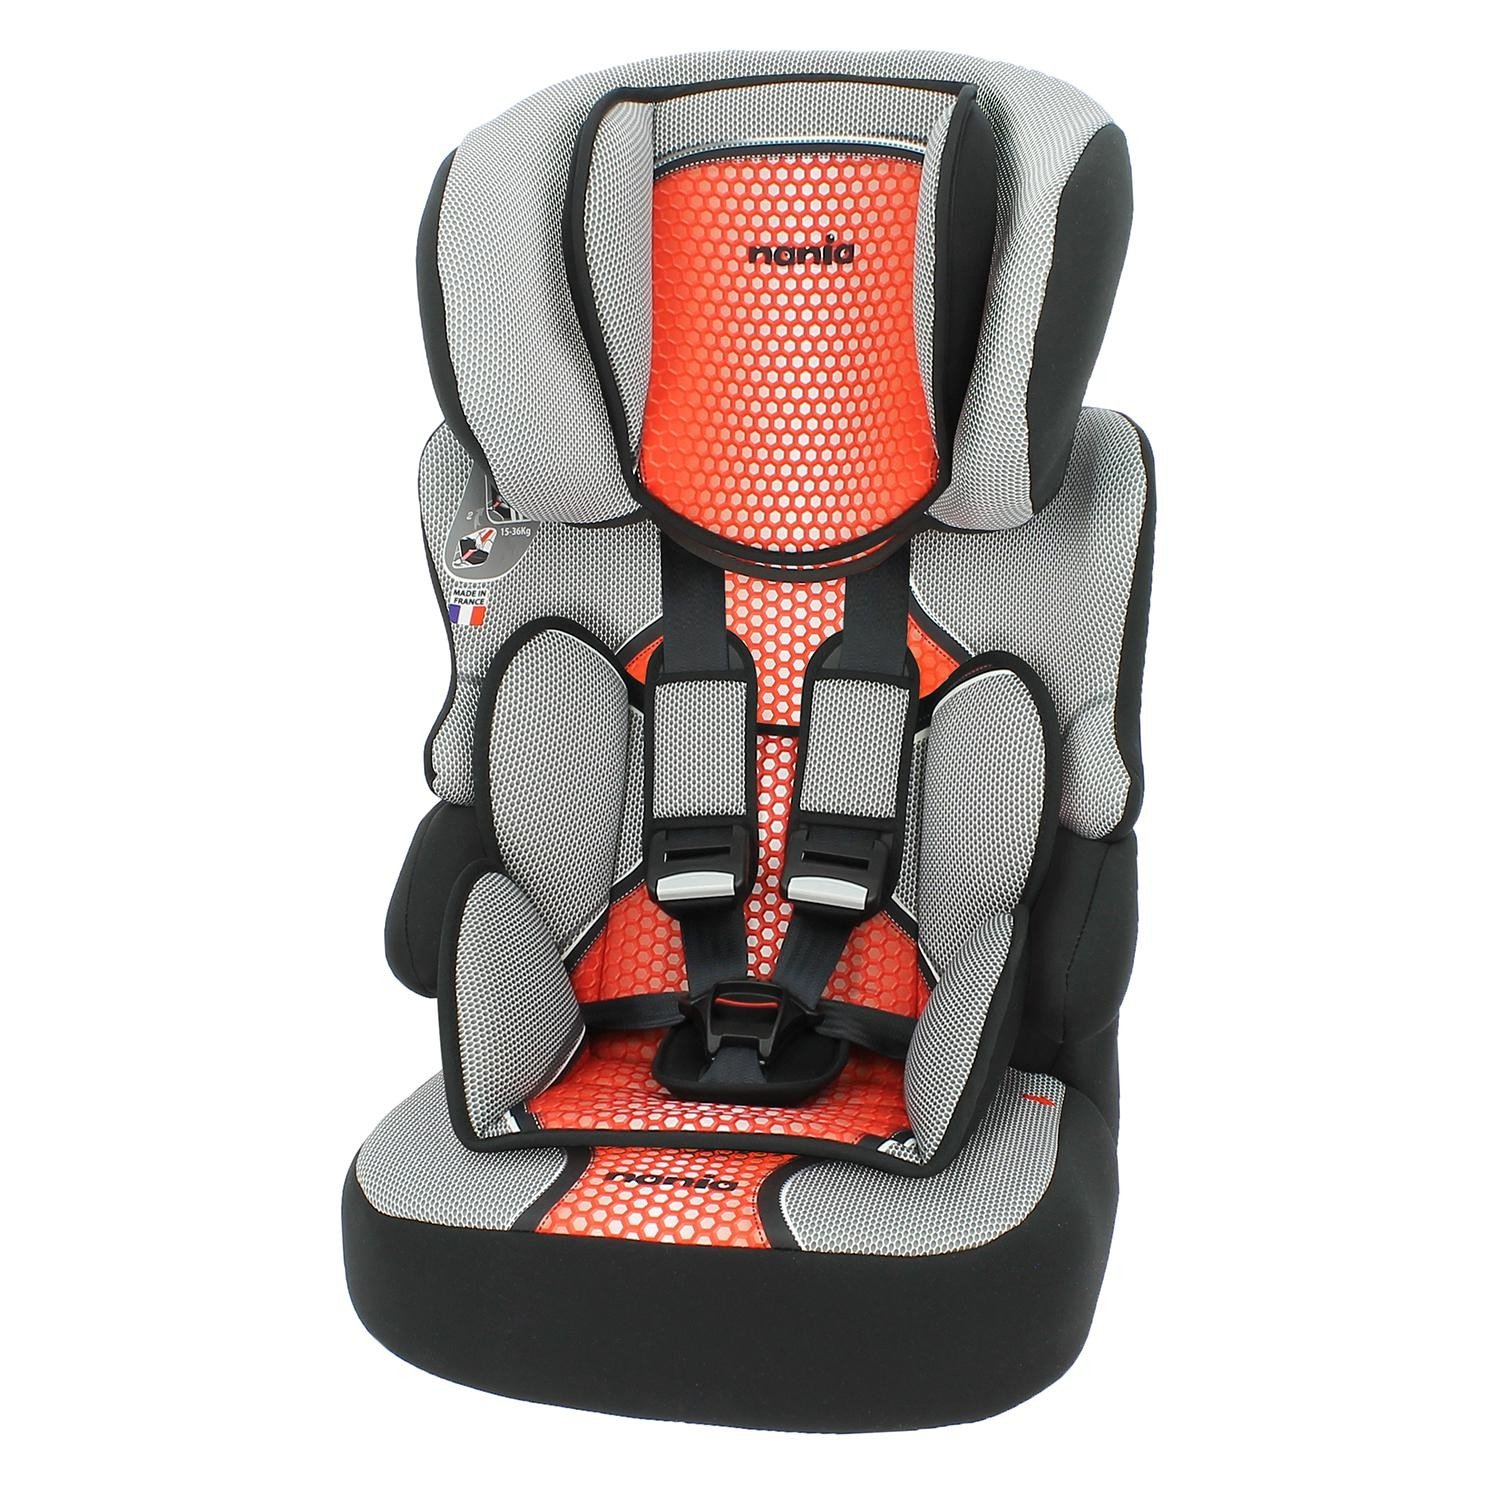 Mycarsit Car seat and booster seat